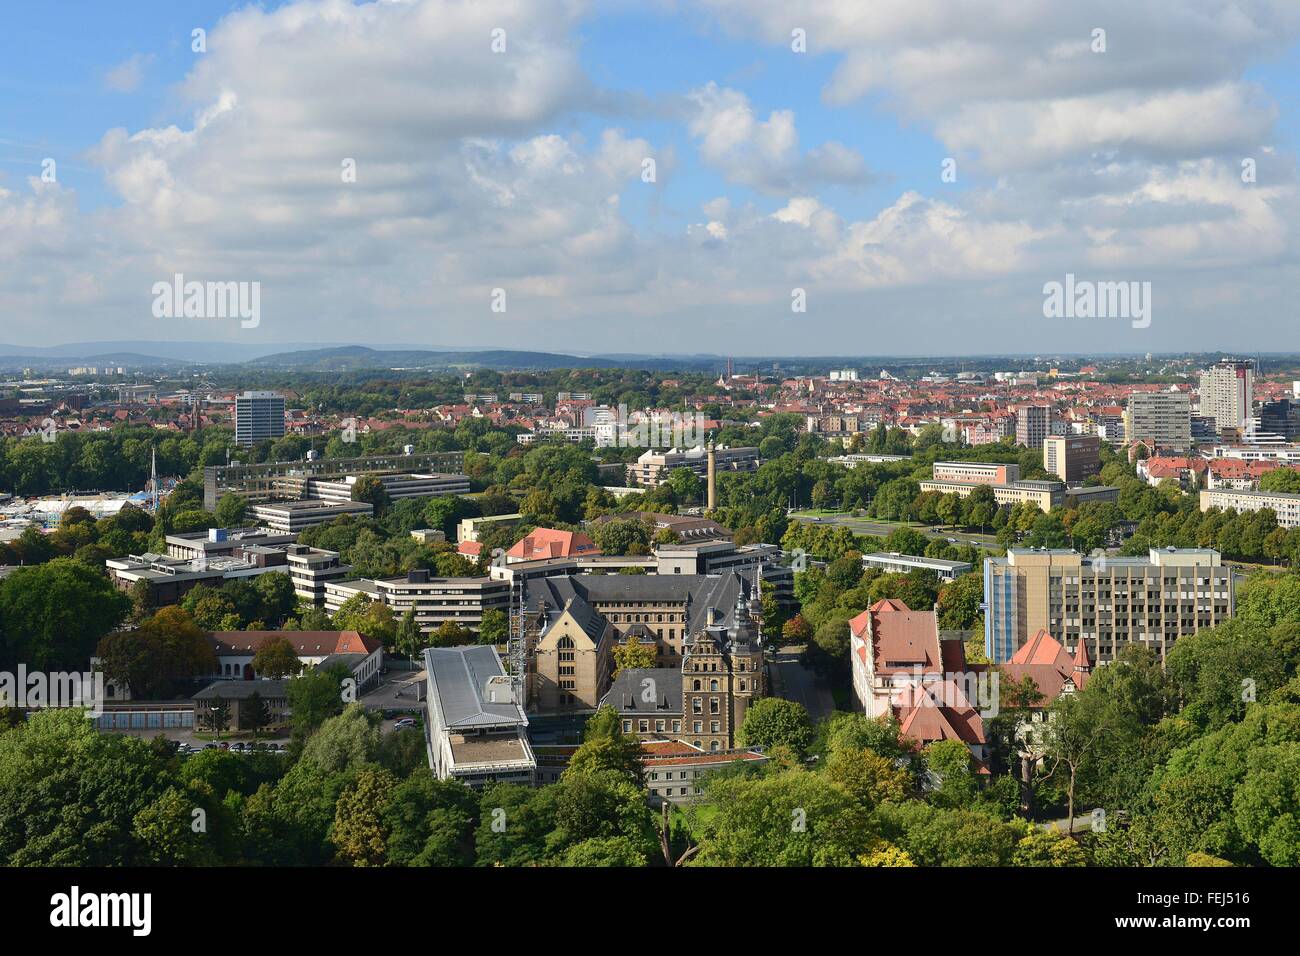 Hannover's west with police administration and the place Waterlooplatz and many green trees under a blue sky, 25 September 2015 Stock Photo